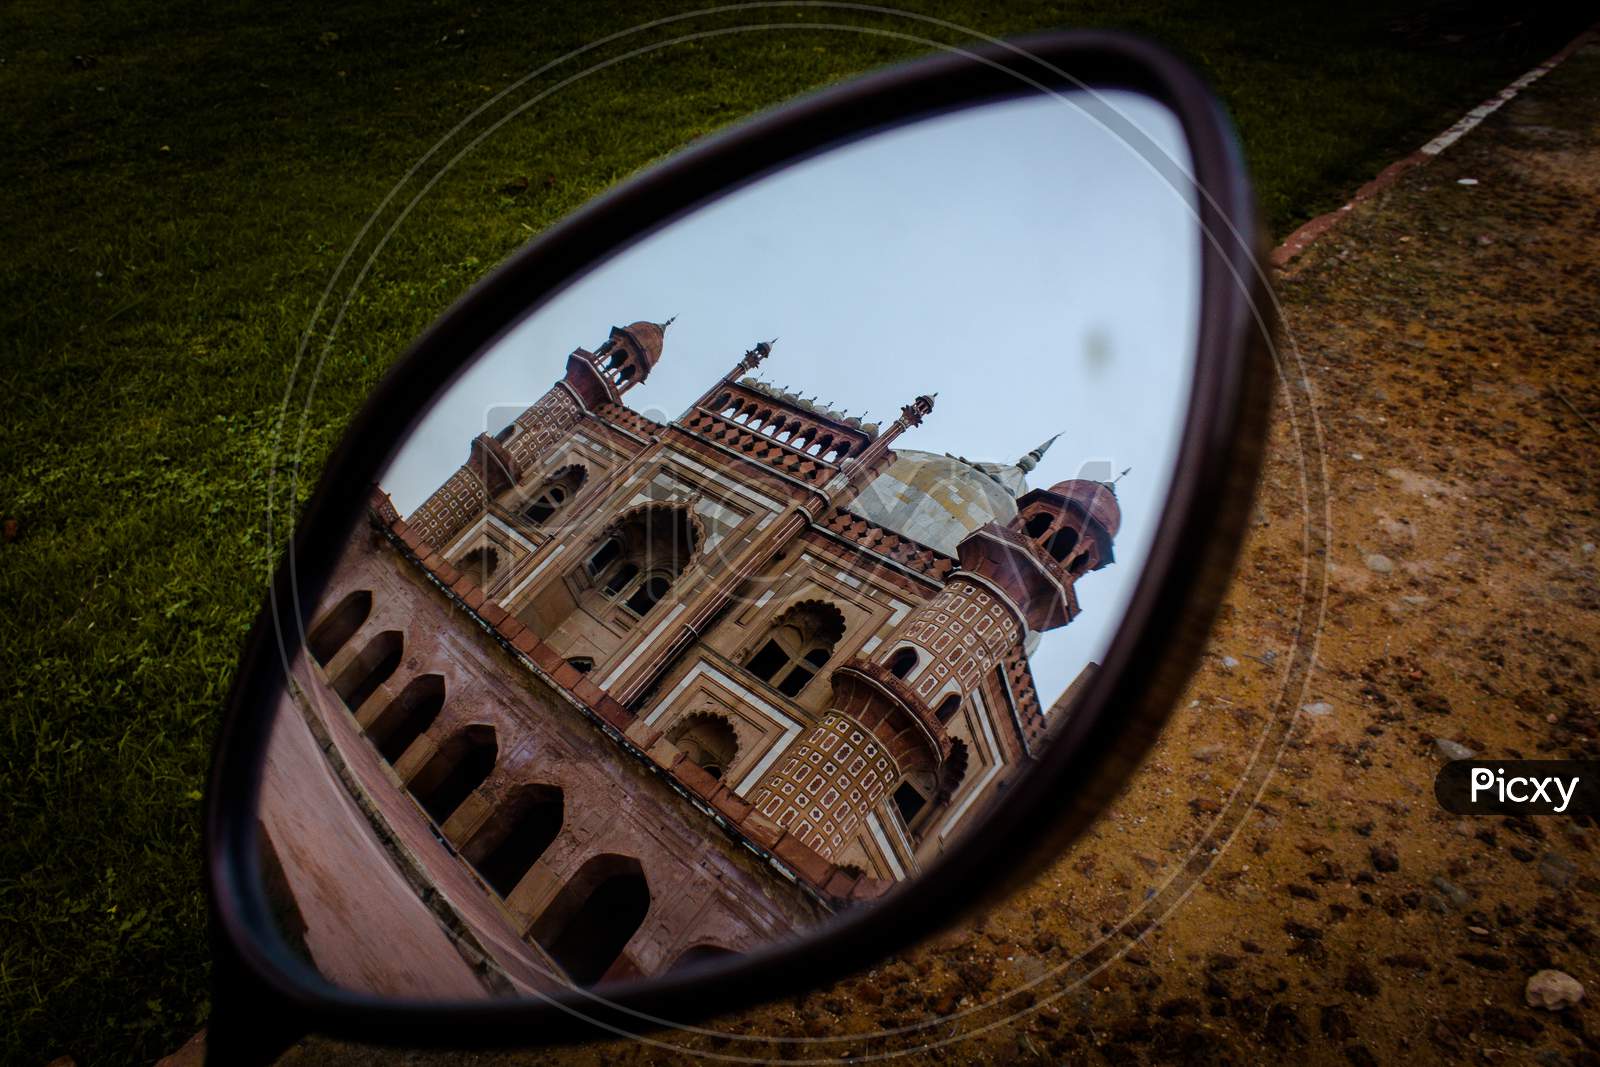 REFLECTION OF THE GREAT SAFDURJUNG TOMB